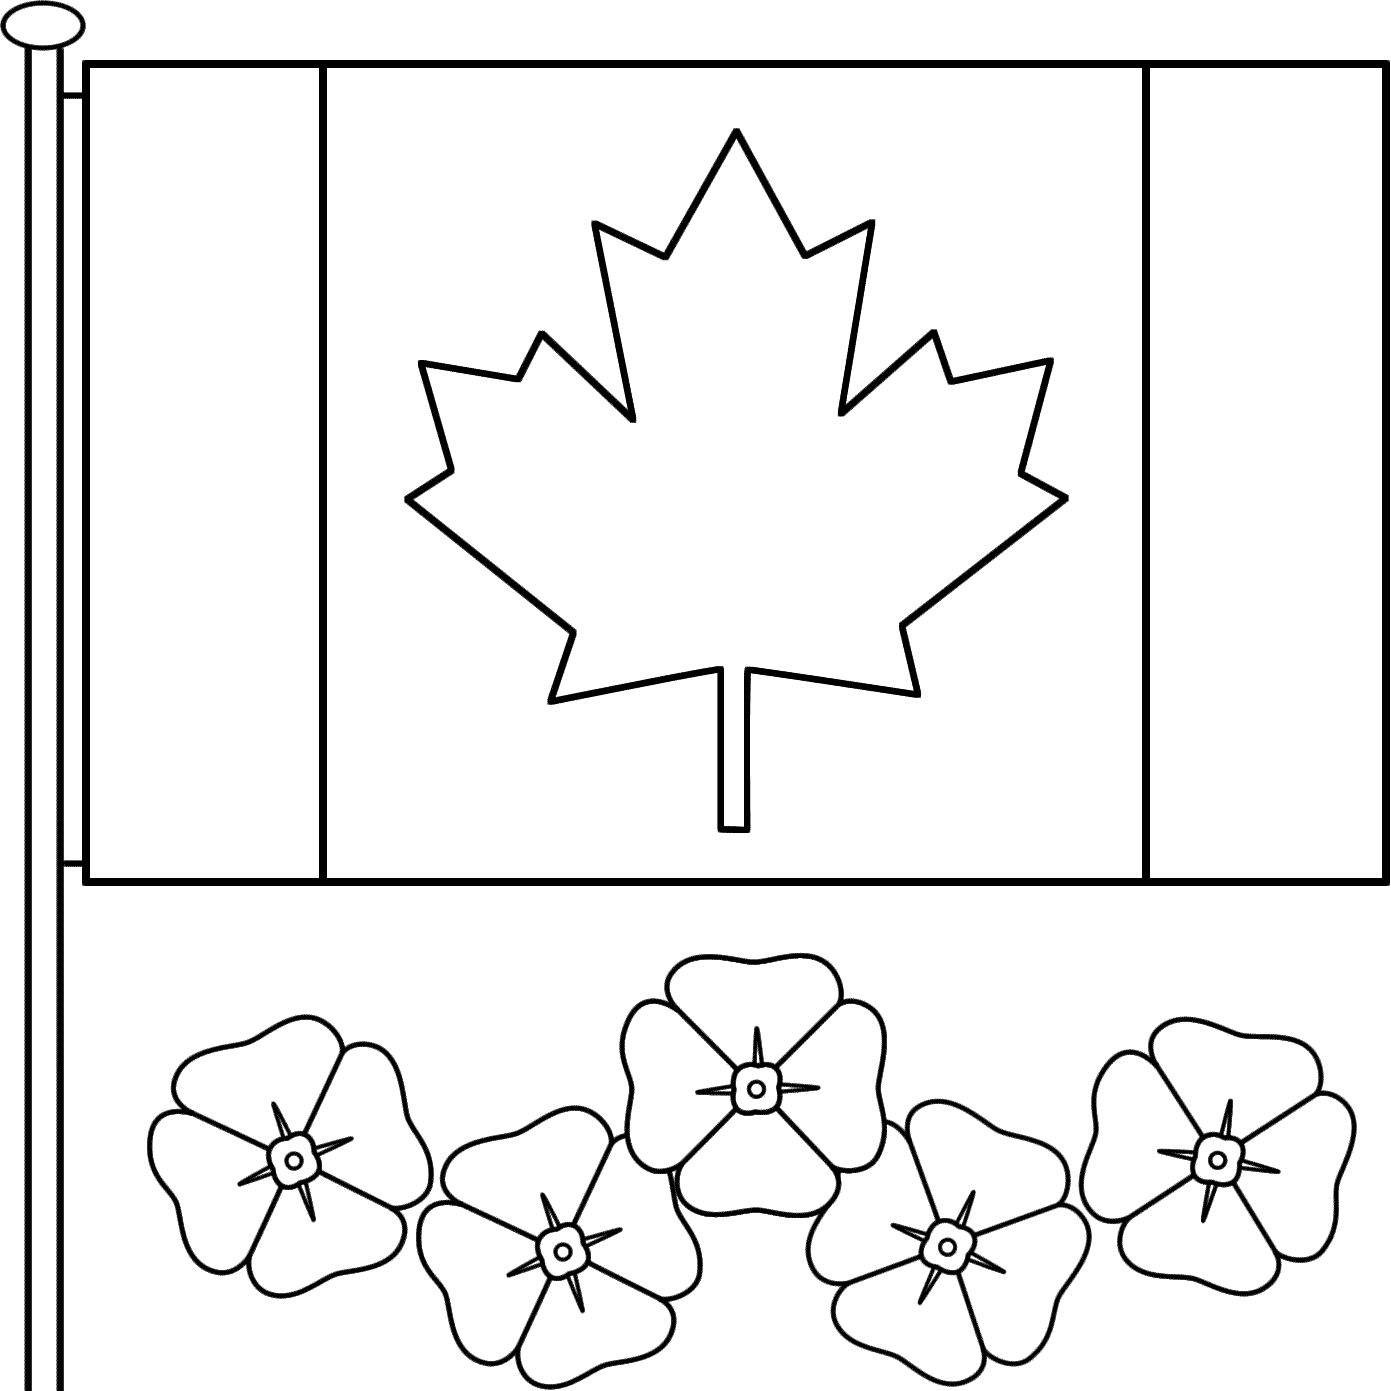  Remembrance Day coloring pages | Remembrance Day colouring pages | #11